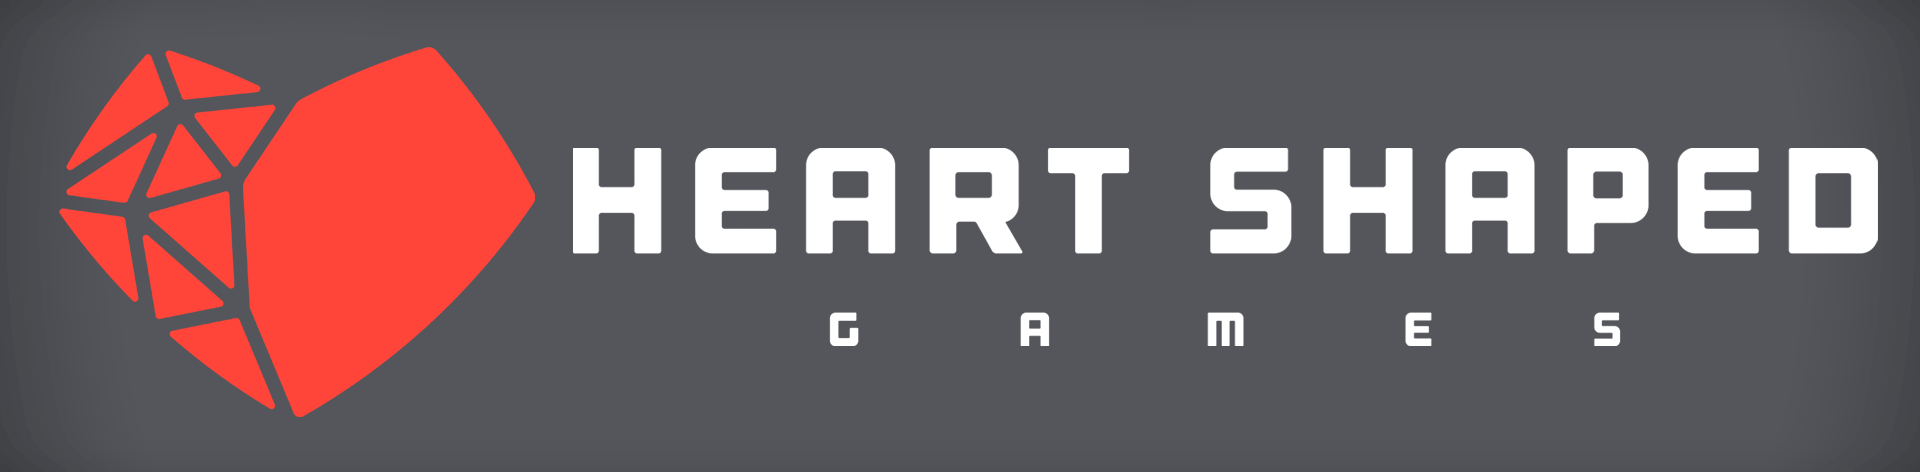 Heart Shaped Games Banner Image